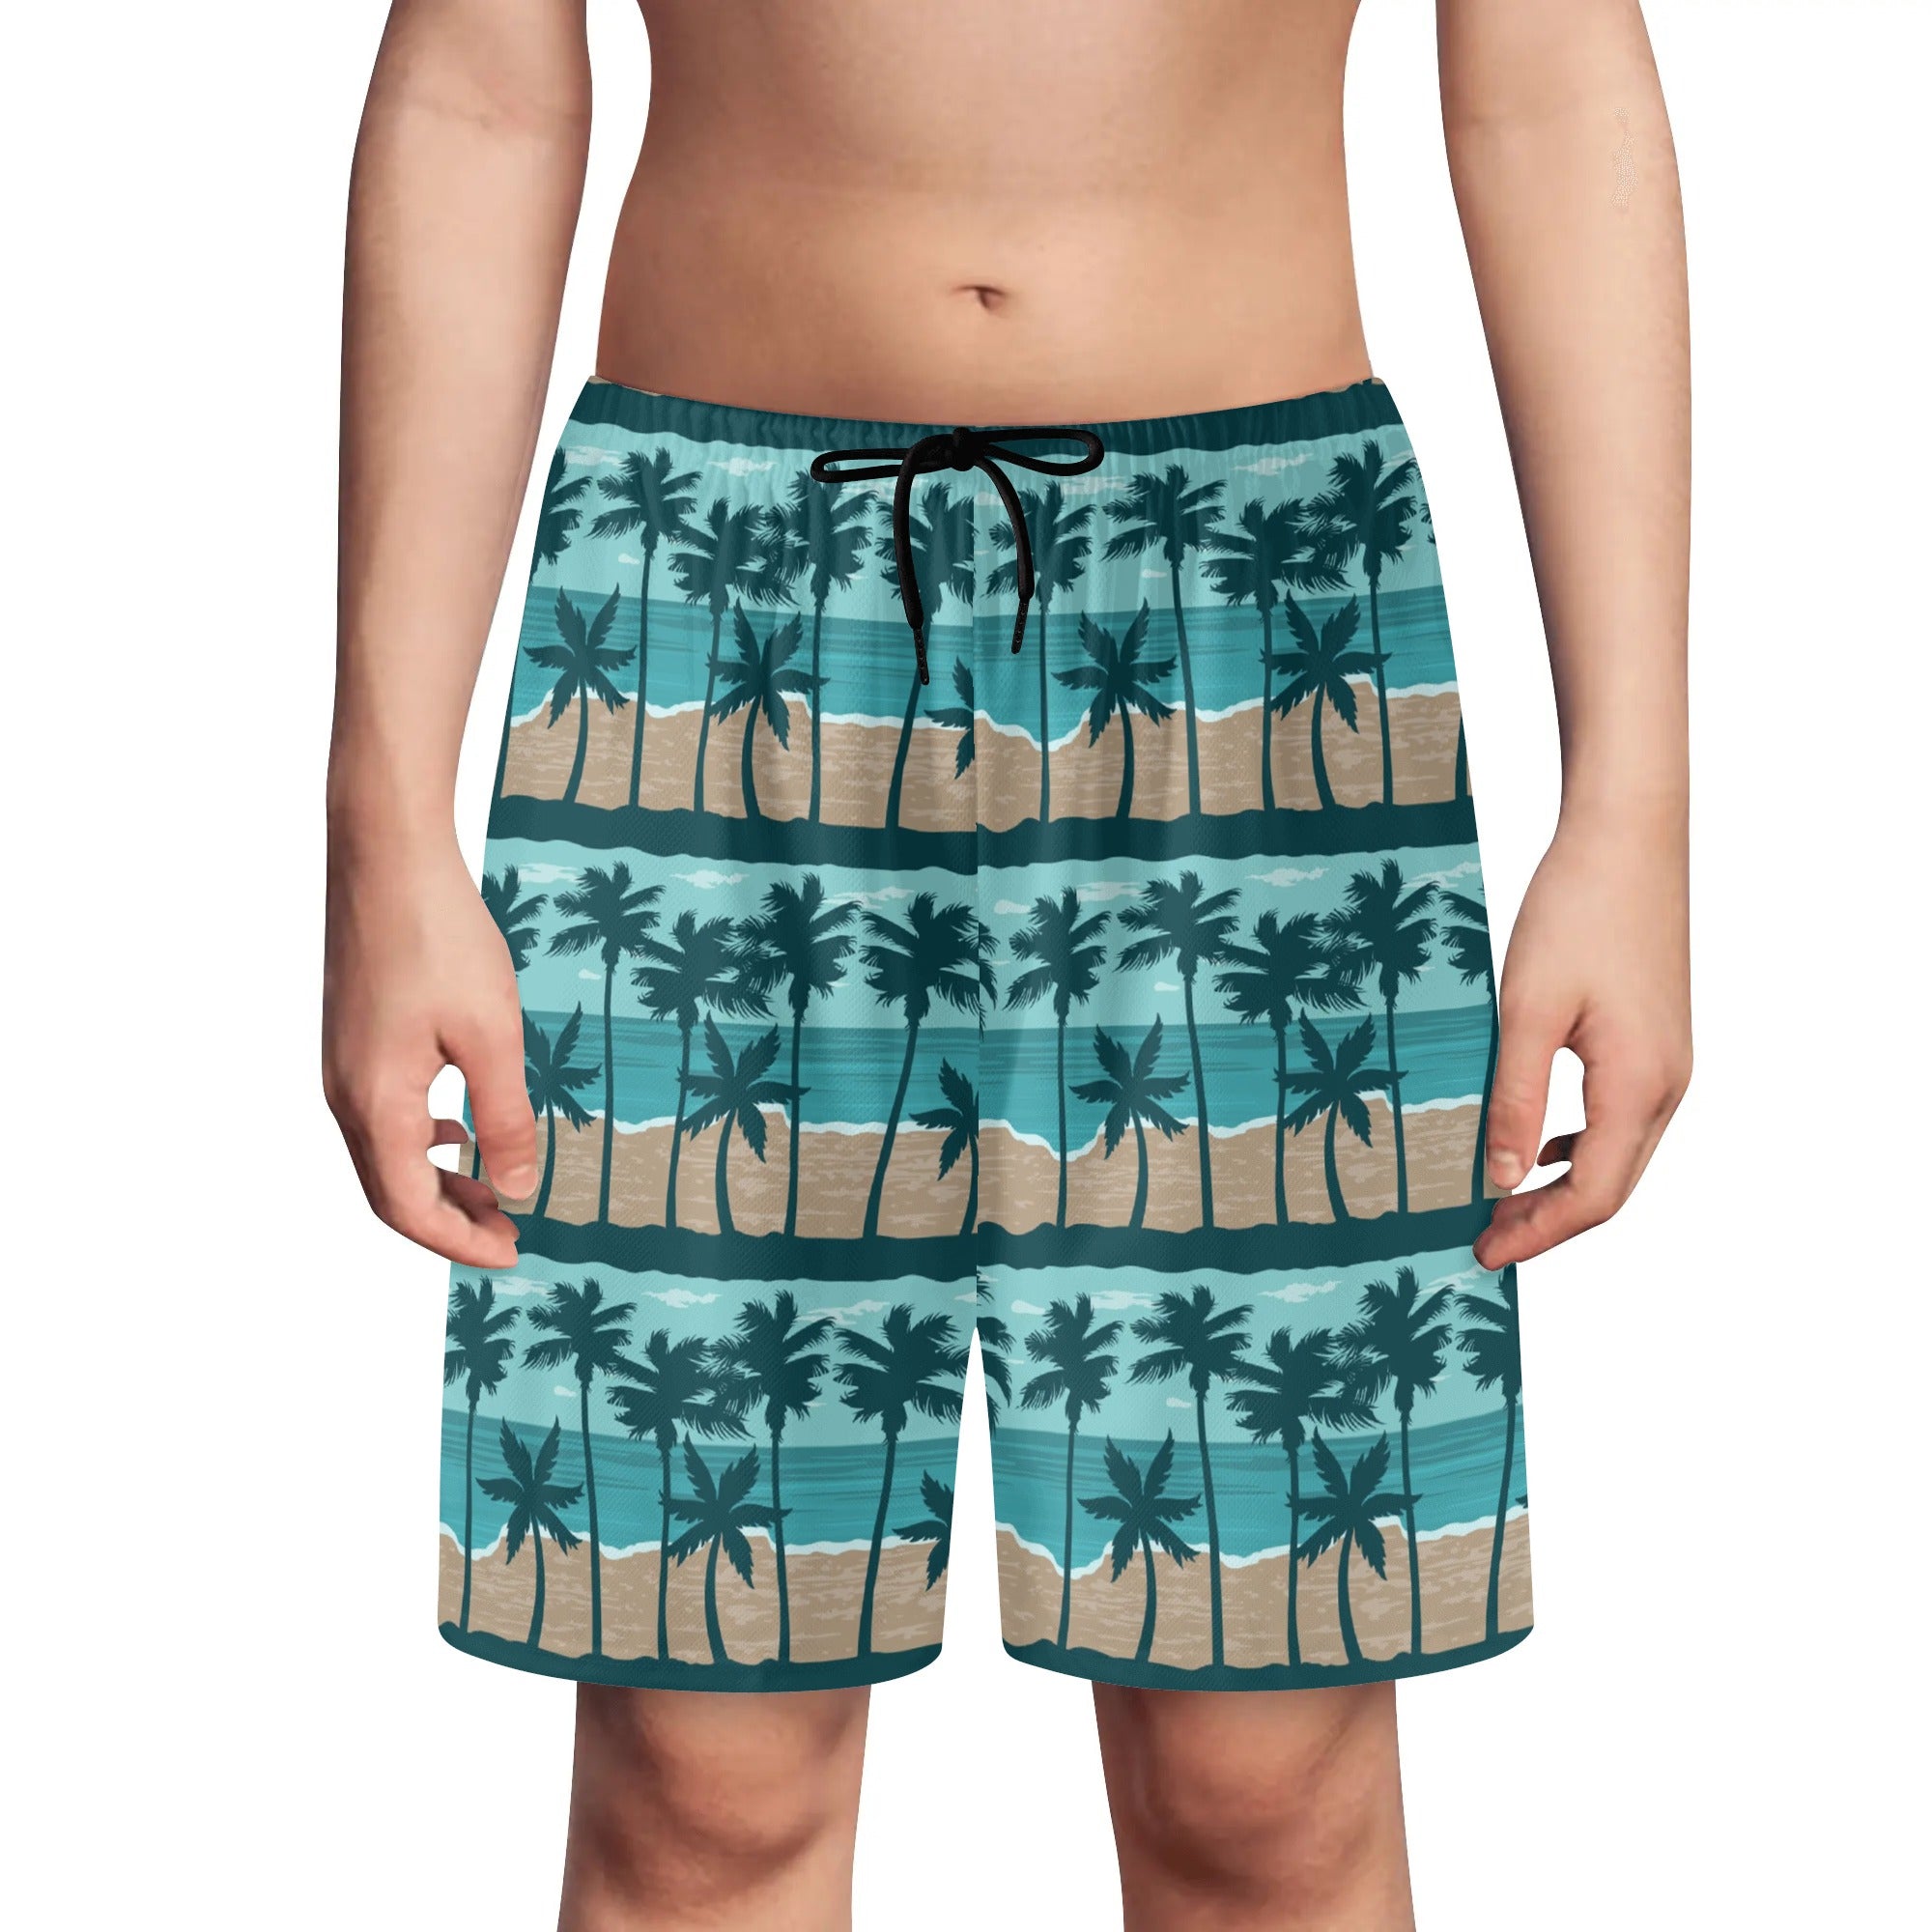 Youth Lightweight Beach Shorts - Tropical Palms Teal